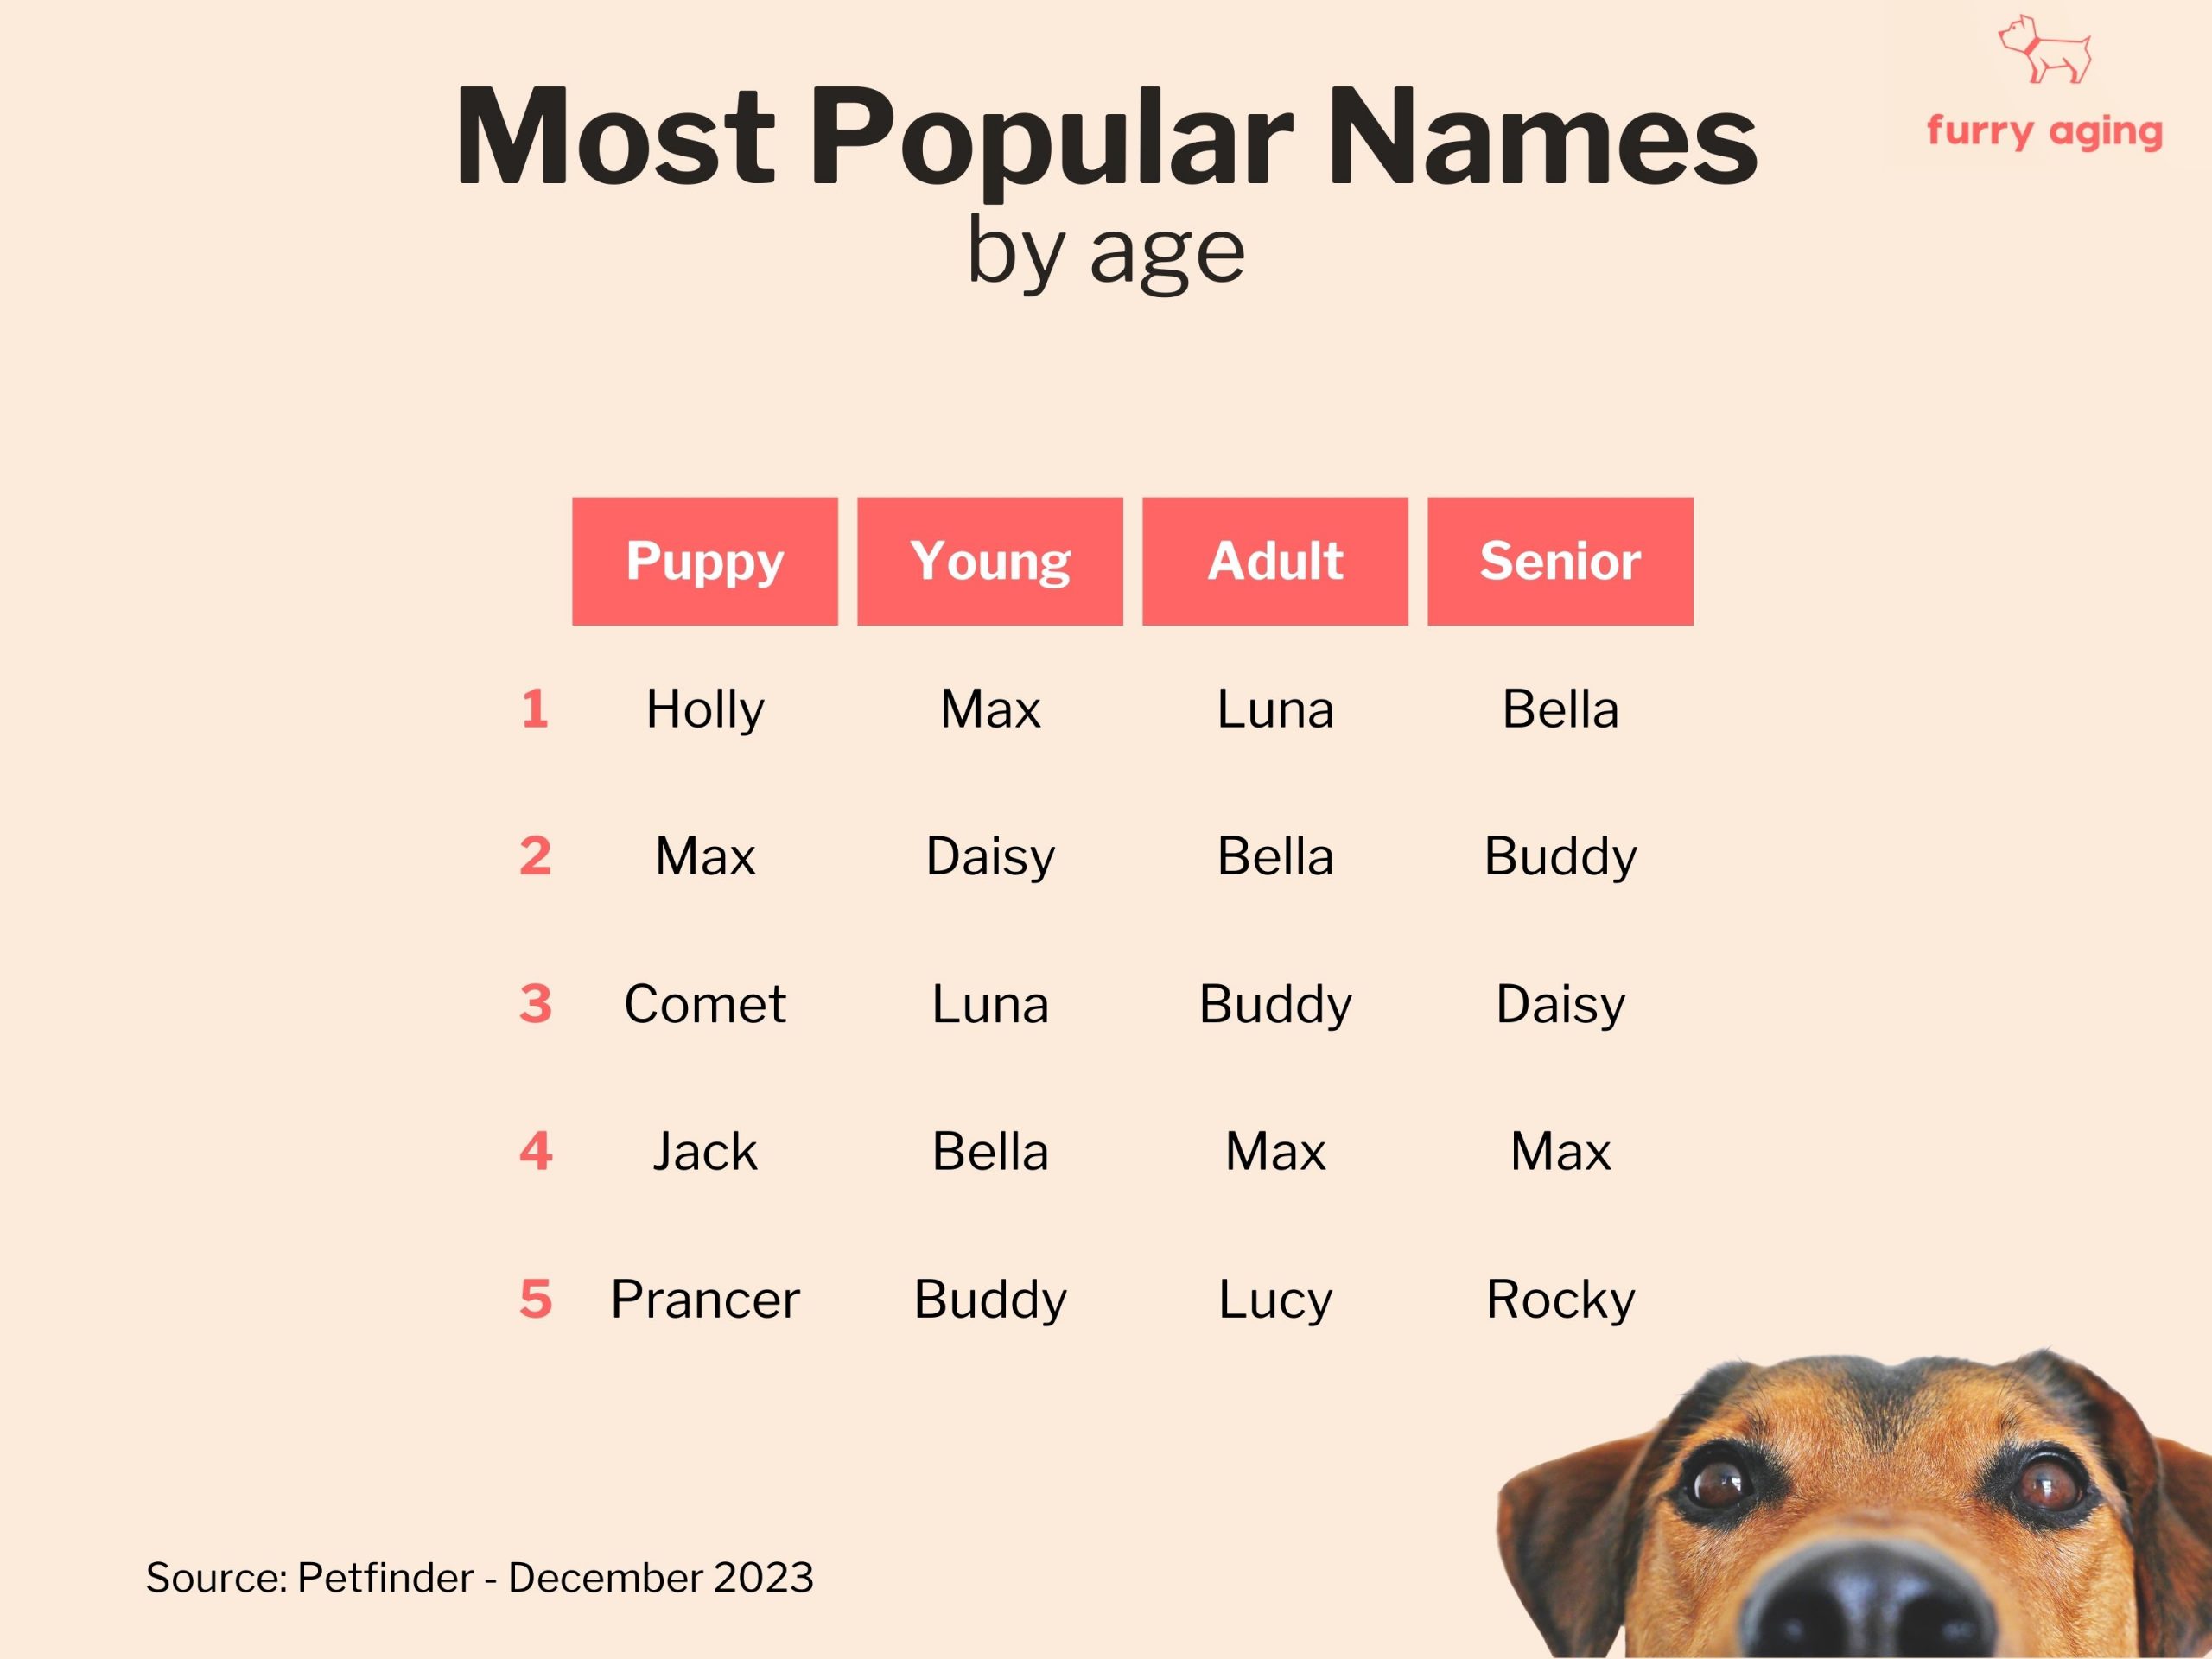 Most popular names by age